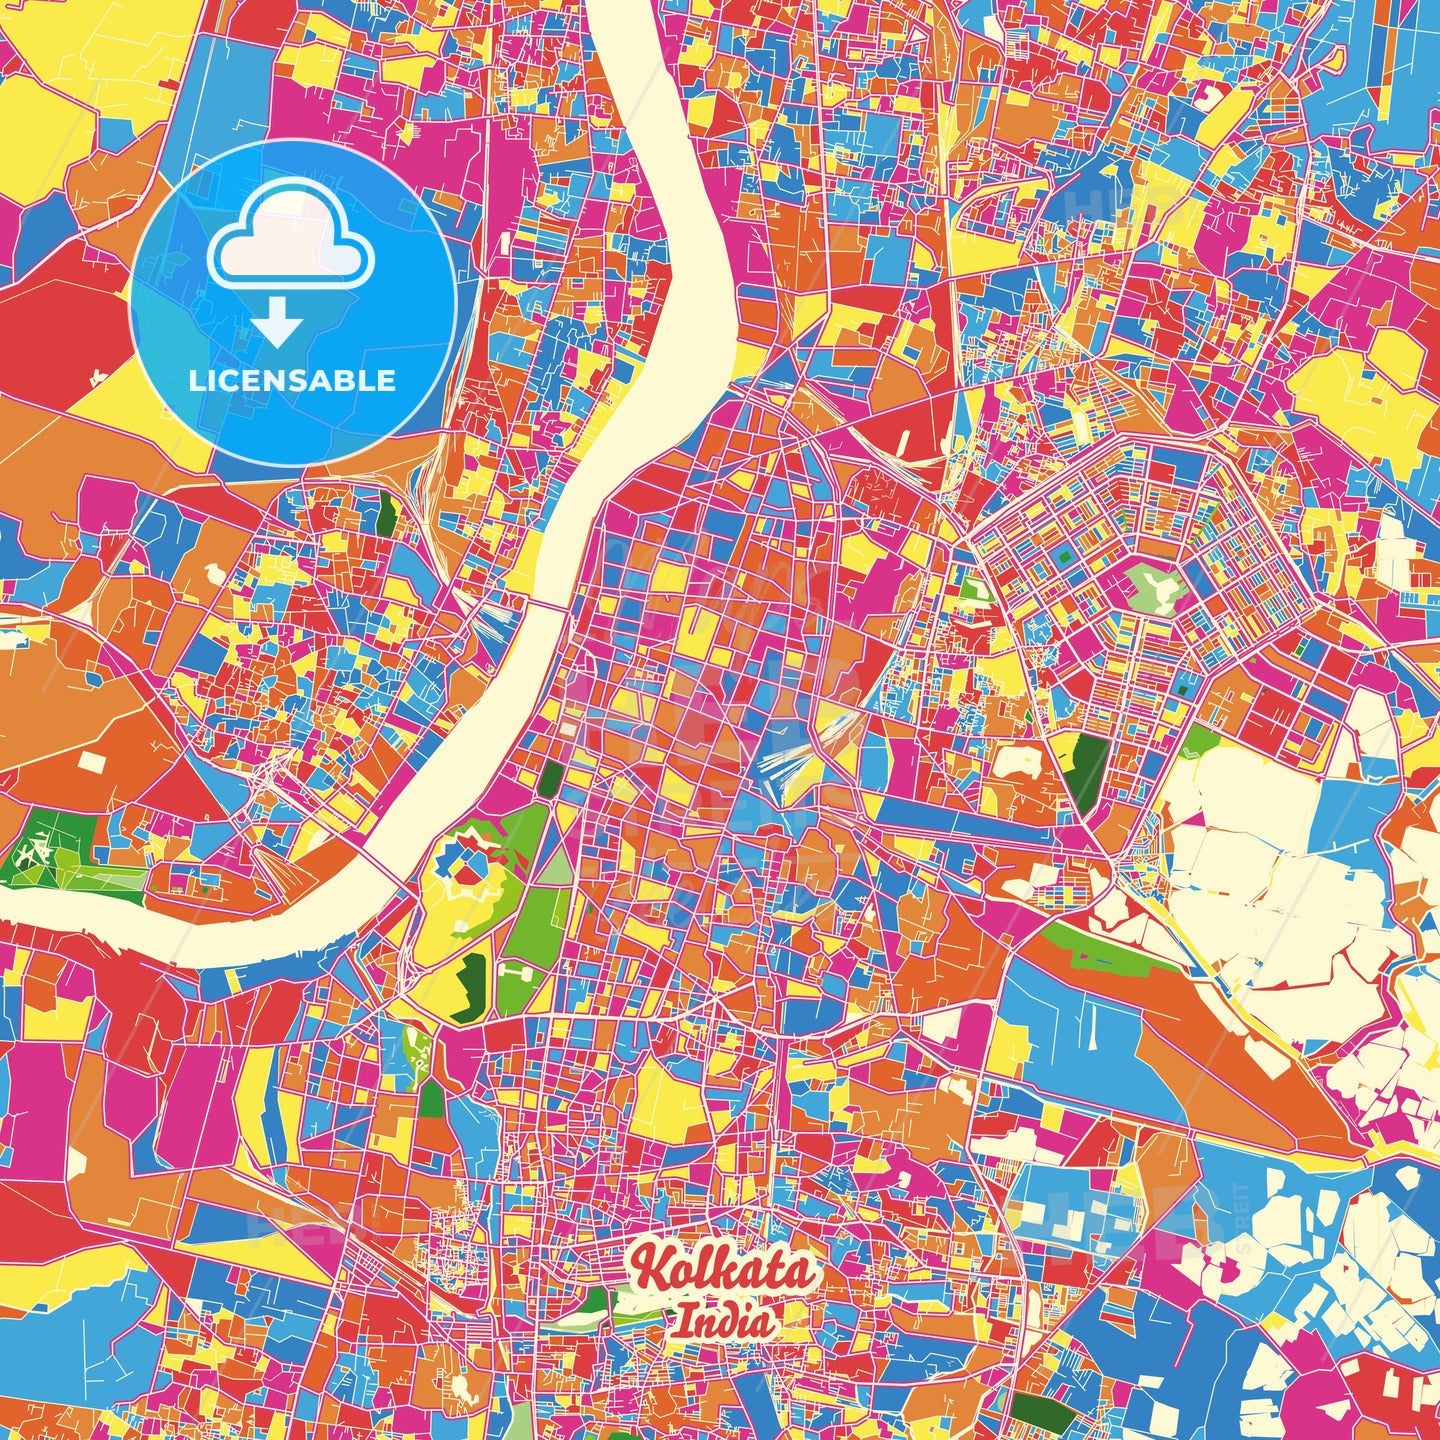 Kolkata, India Crazy Colorful Street Map Poster Template - HEBSTREITS Sketches